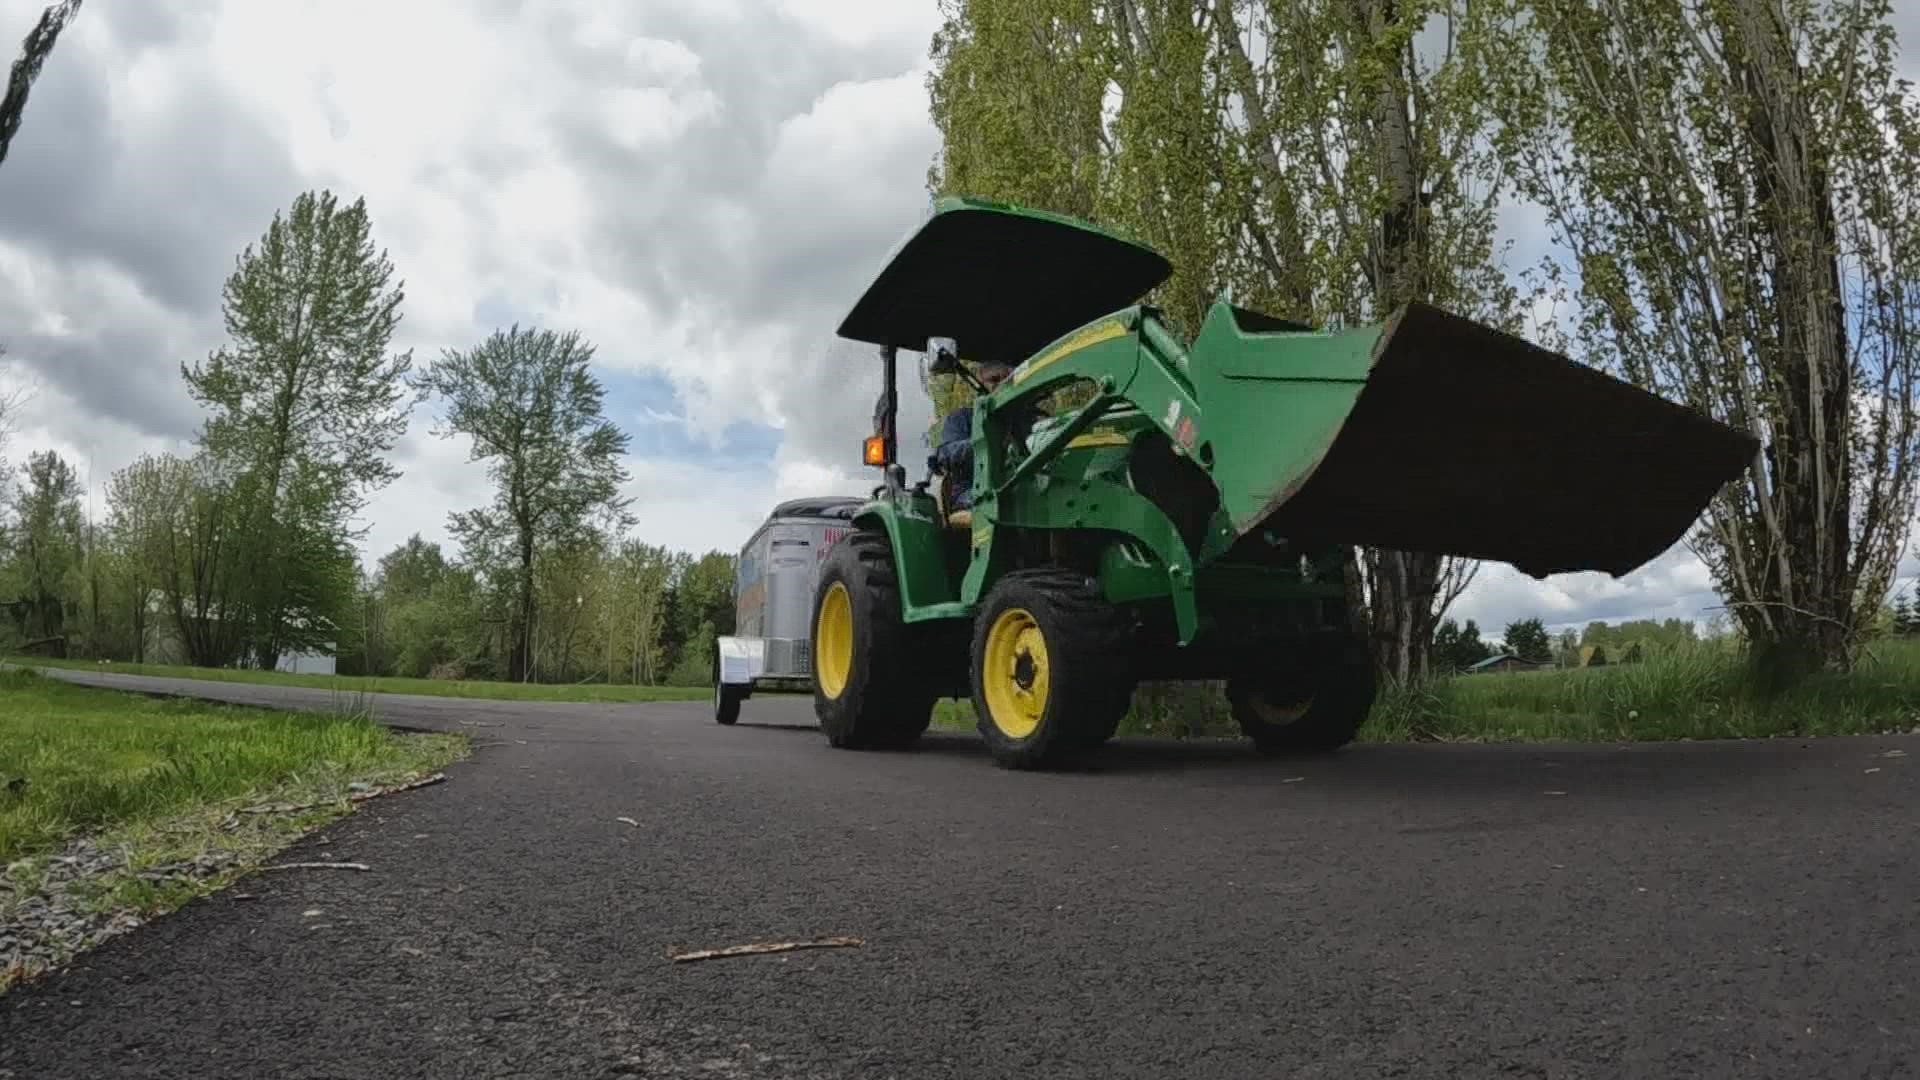 76-year-old Mike Adkinson is preparing to pull a trailer with his John Deere tractor more than 1,700 miles from Bellingham to Minnesota to honor his brother.